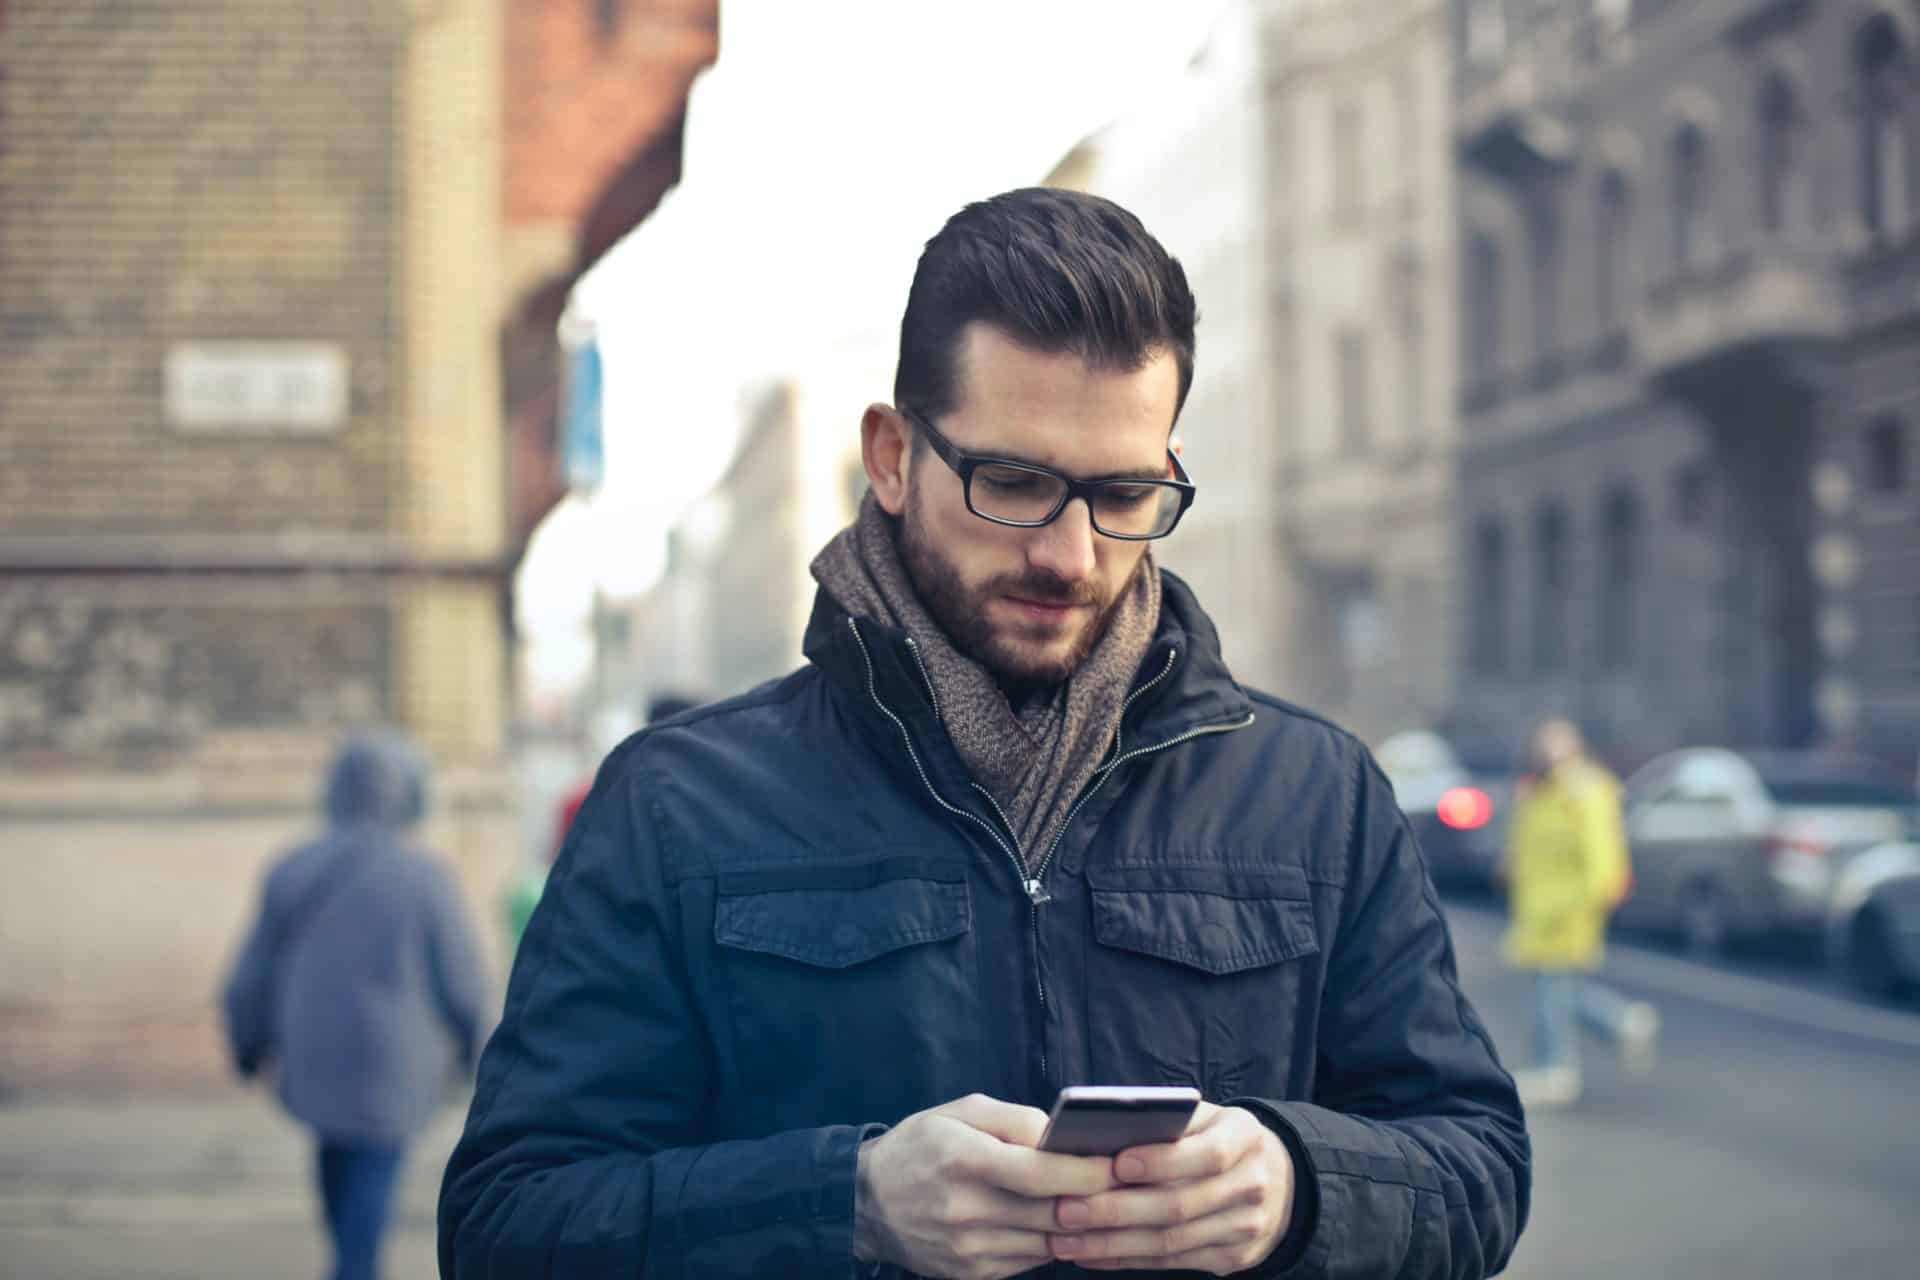 Photo by Andrea Piacquadio: https://www.pexels.com/photo/man-wearing-black-zip-jacket-holding-smartphone-surrounded-by-grey-concrete-buildings-775091/